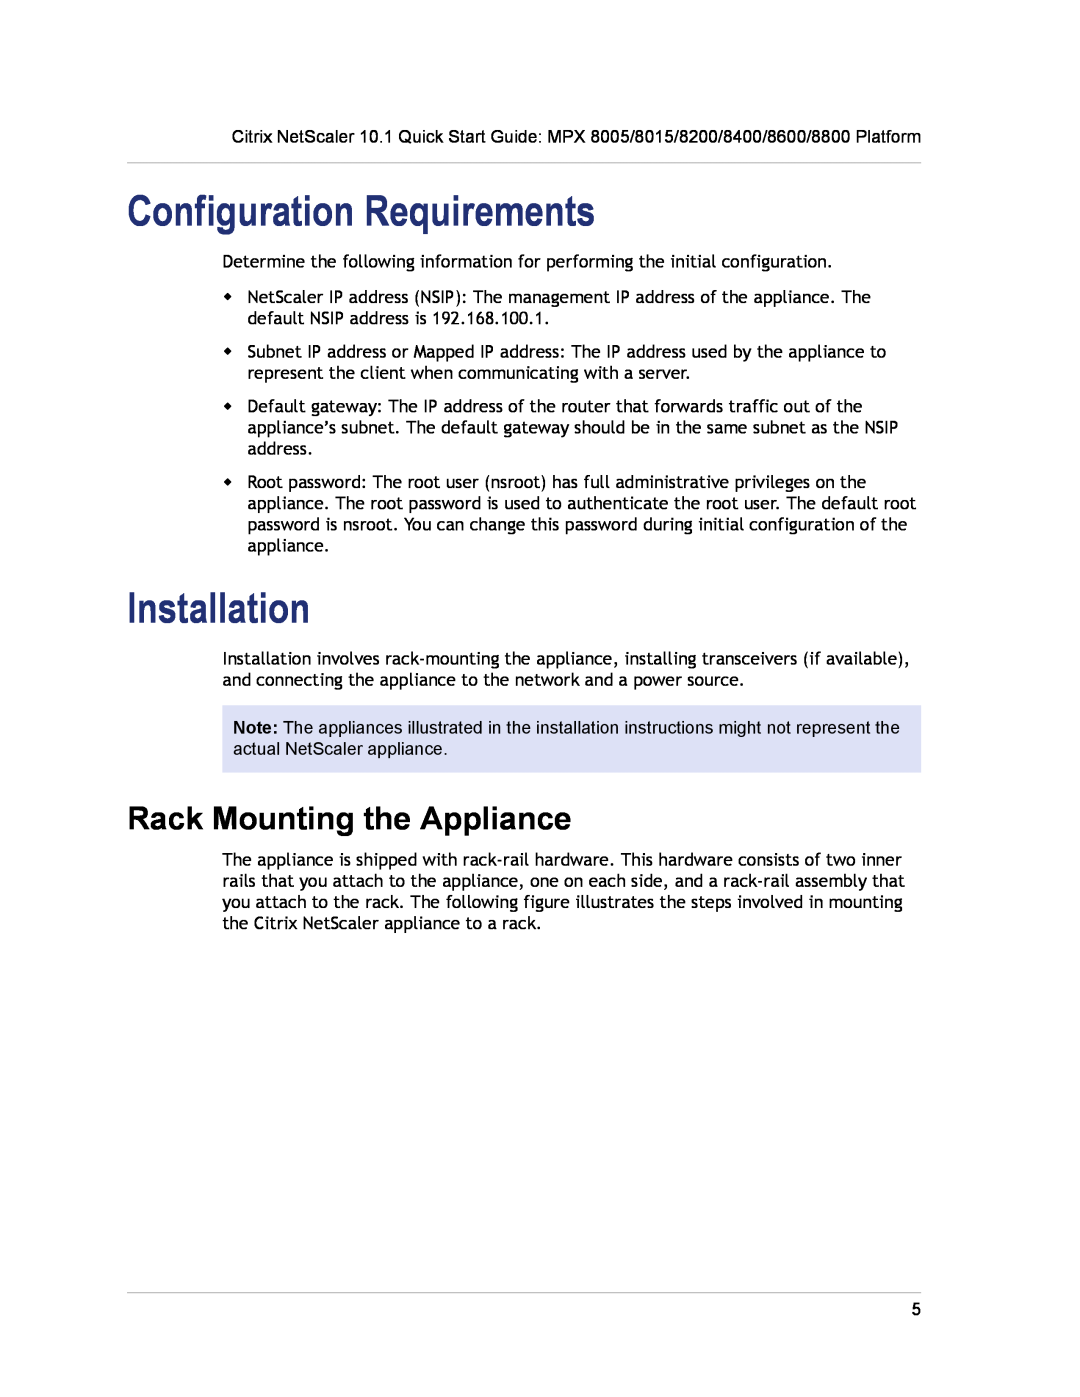 Citrix Systems 8015, 8800, 8600, 8200, 8005, 8400 Configuration Requirements, Installation, Rack Mounting the Appliance 